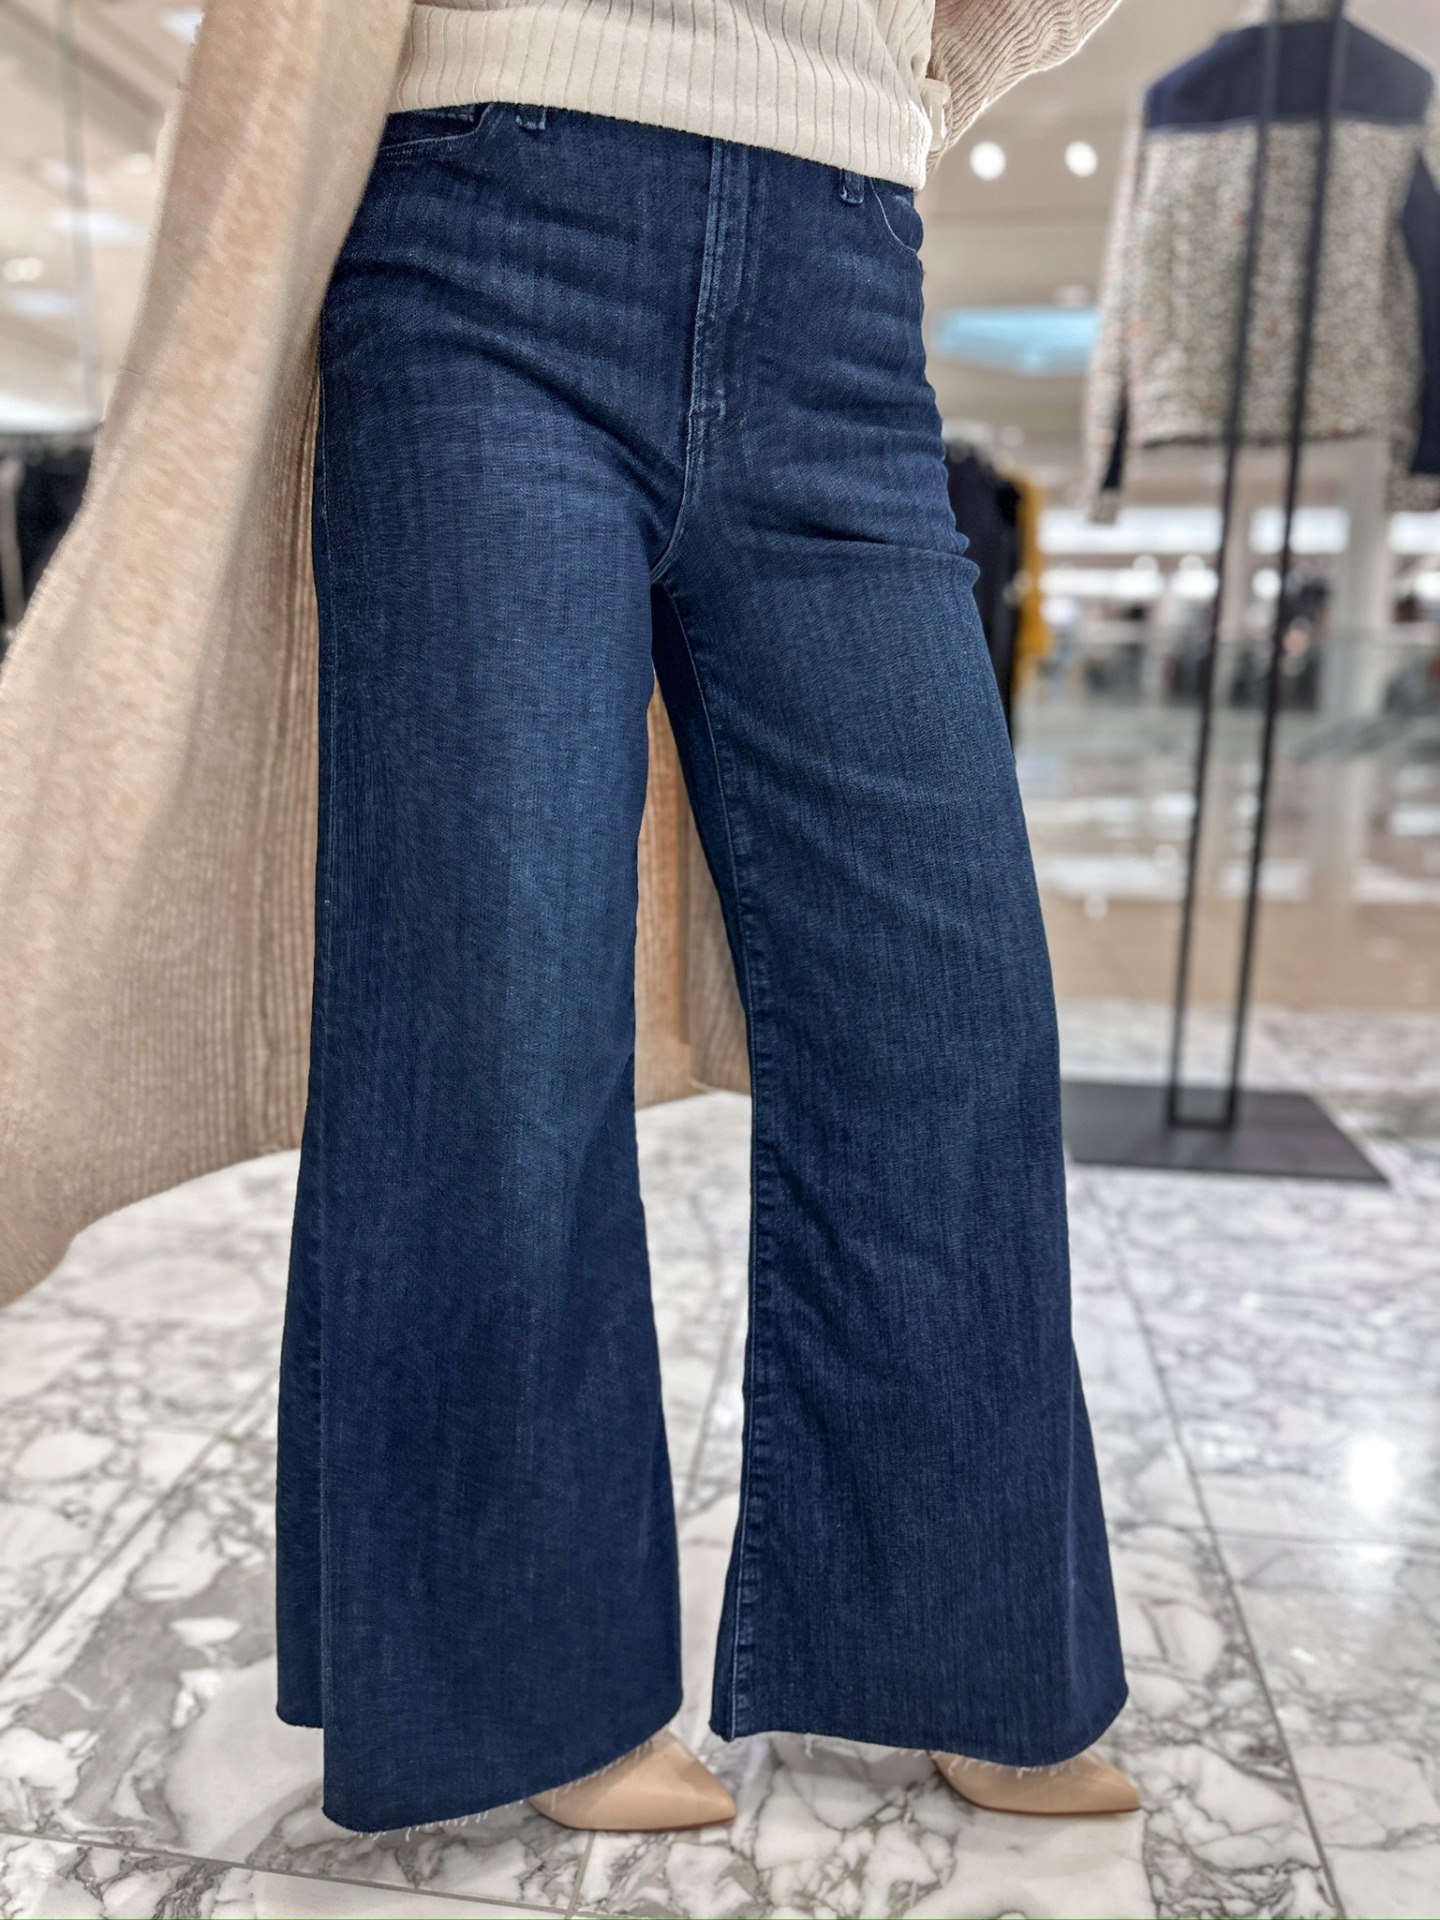 Wide-Leg Jeans | Nordstrom Sale Outfits for Women 40 & 50+